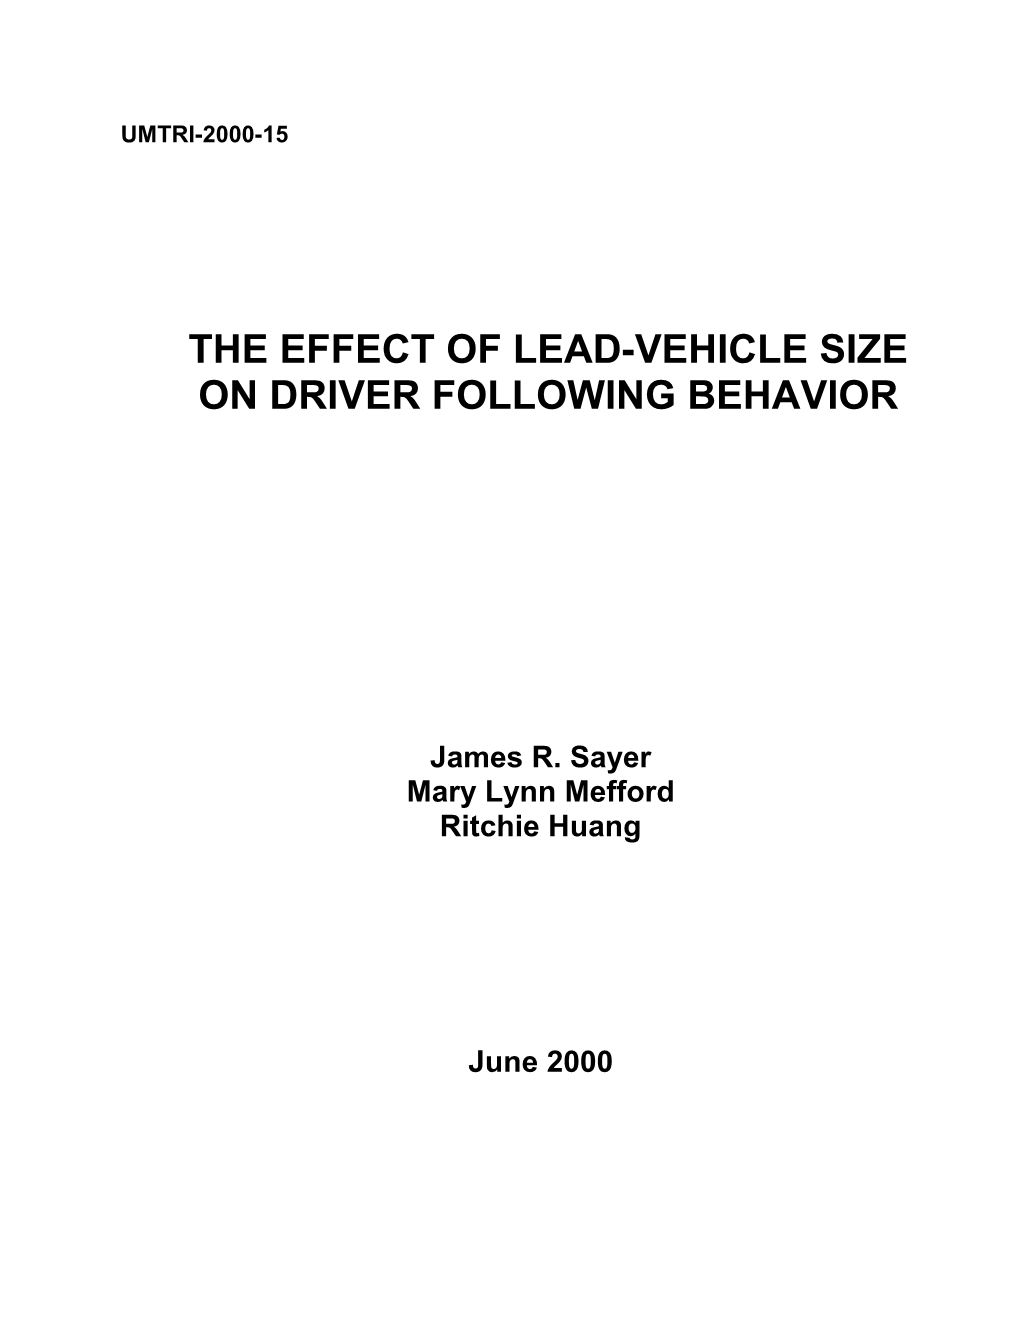 The Effect of Lead-Vehicle Size on Driver Following Behavior